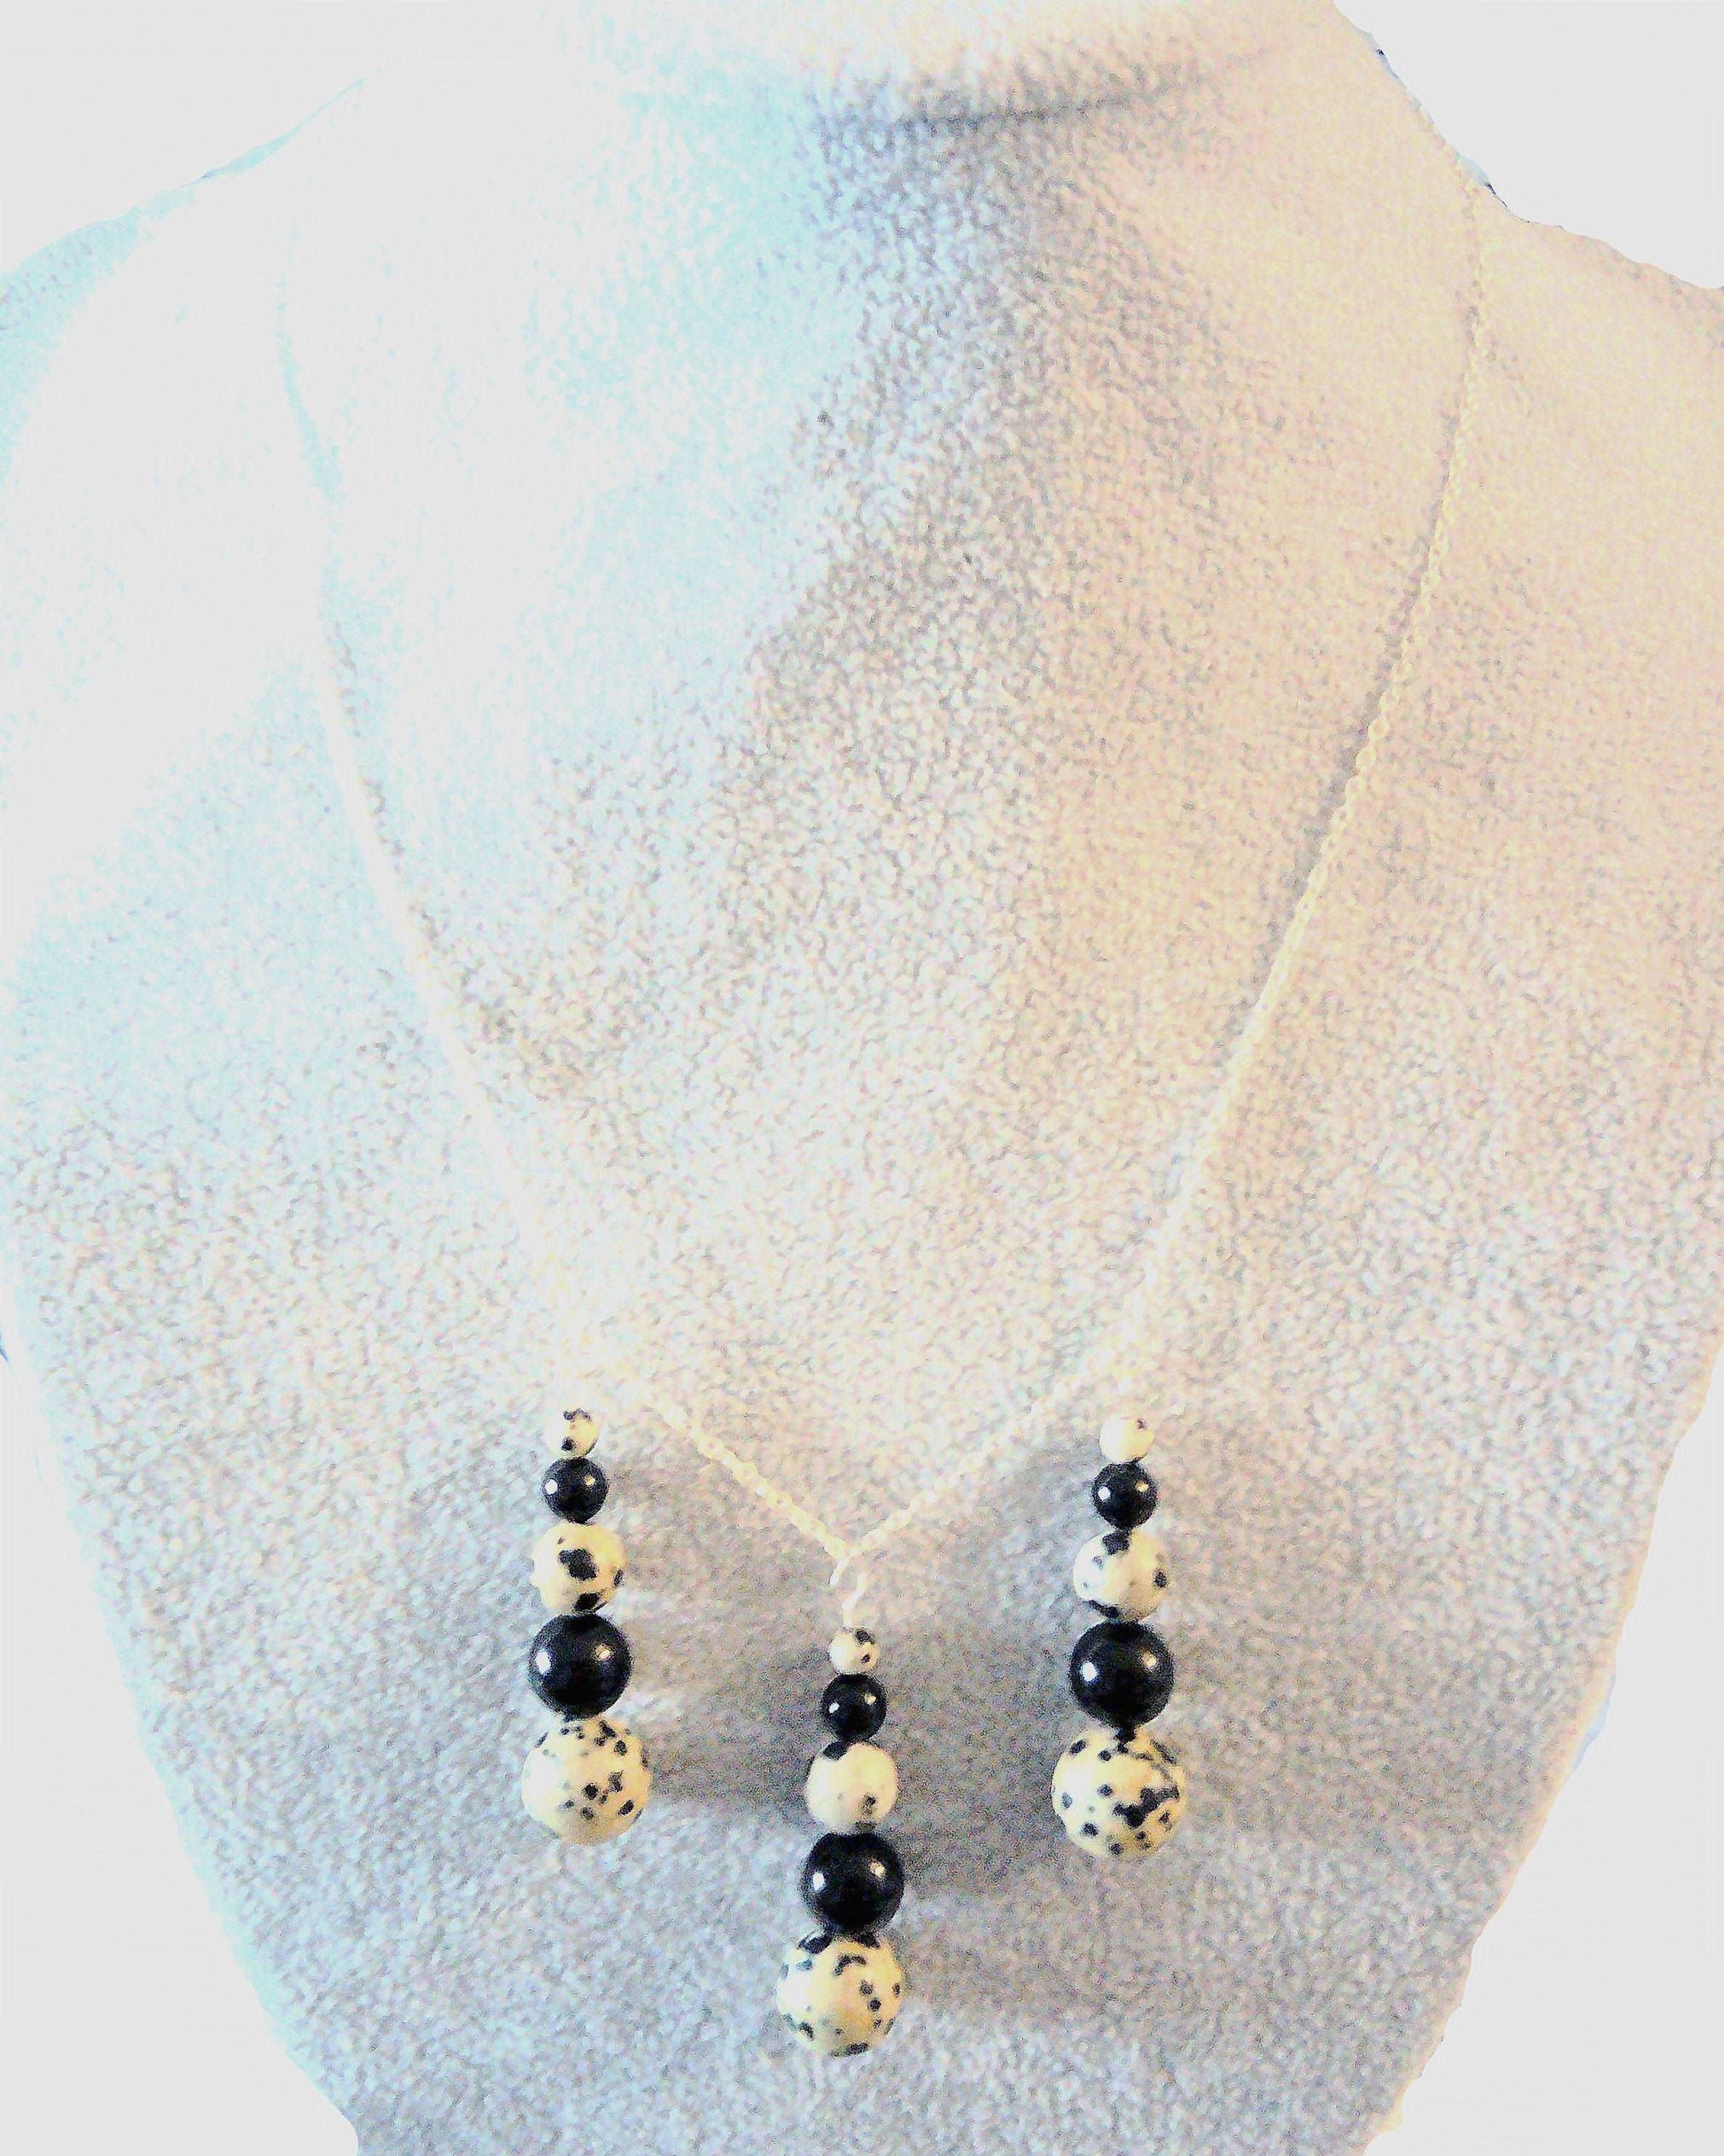 Genuine dalmation spot-black onyx beads with 100% .925 sterling silver necklace chain - Providence silver gold jewelry usa